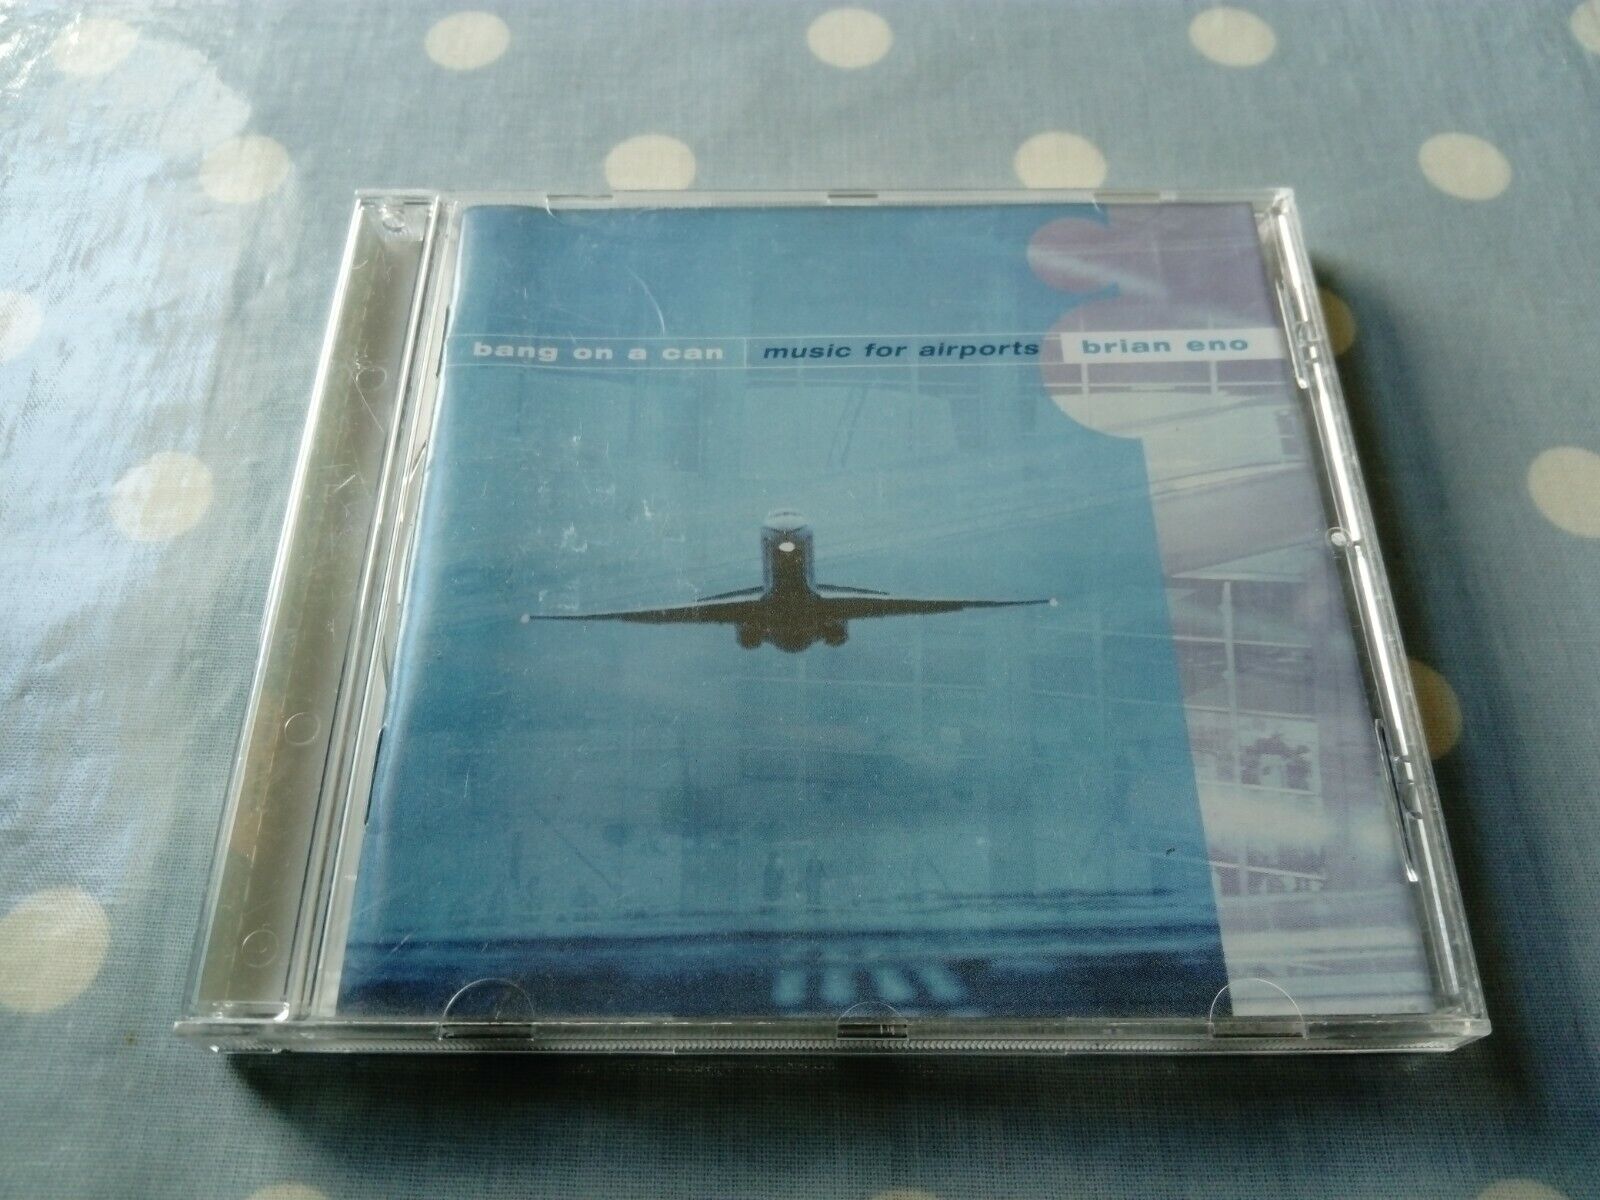 Bang On A Can Music For Airports - Brian Eno 4 Track CD 